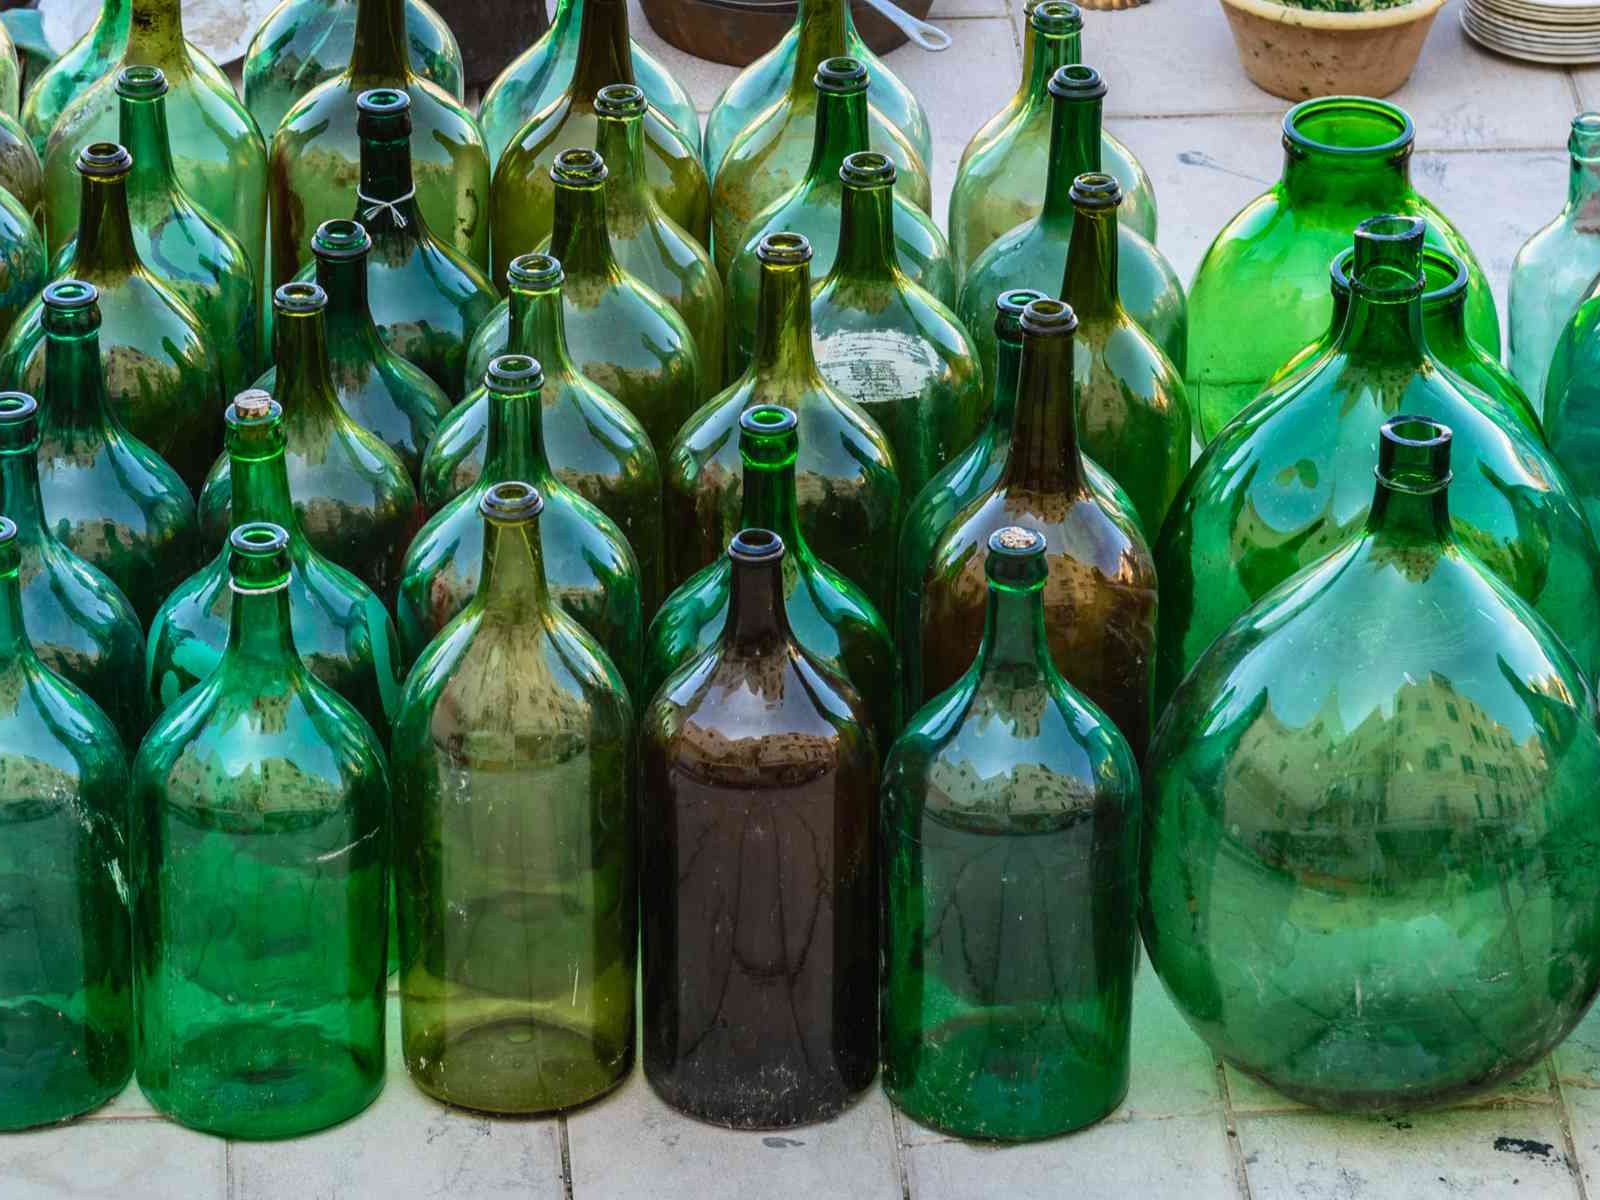 The manufacture of sturdy bottles was key to the evolution of sparkling wines.